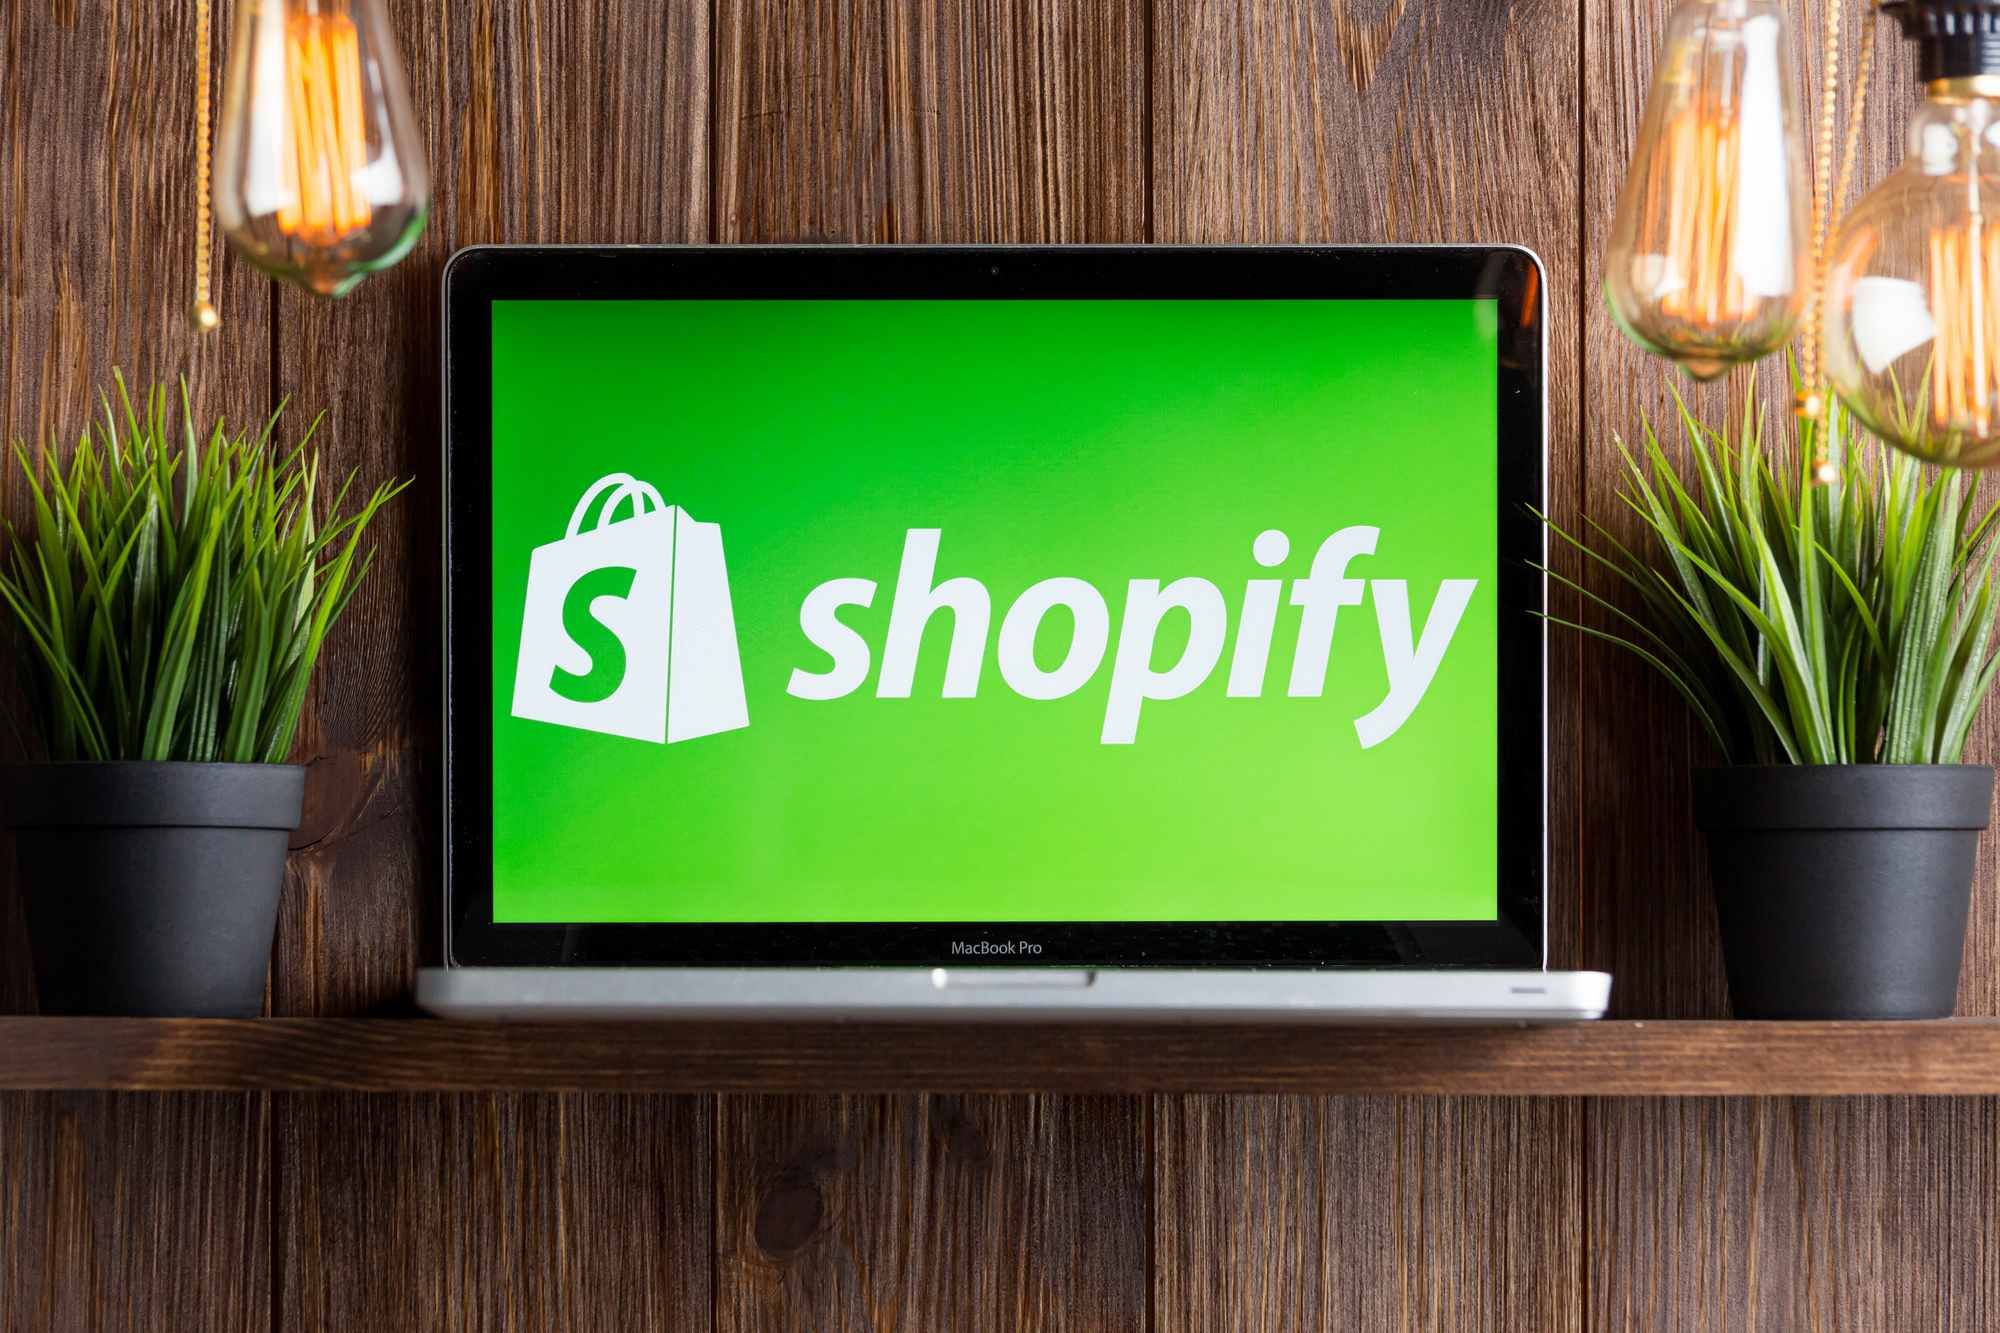 Shopify data breach has resulted in a class action lawsuit.